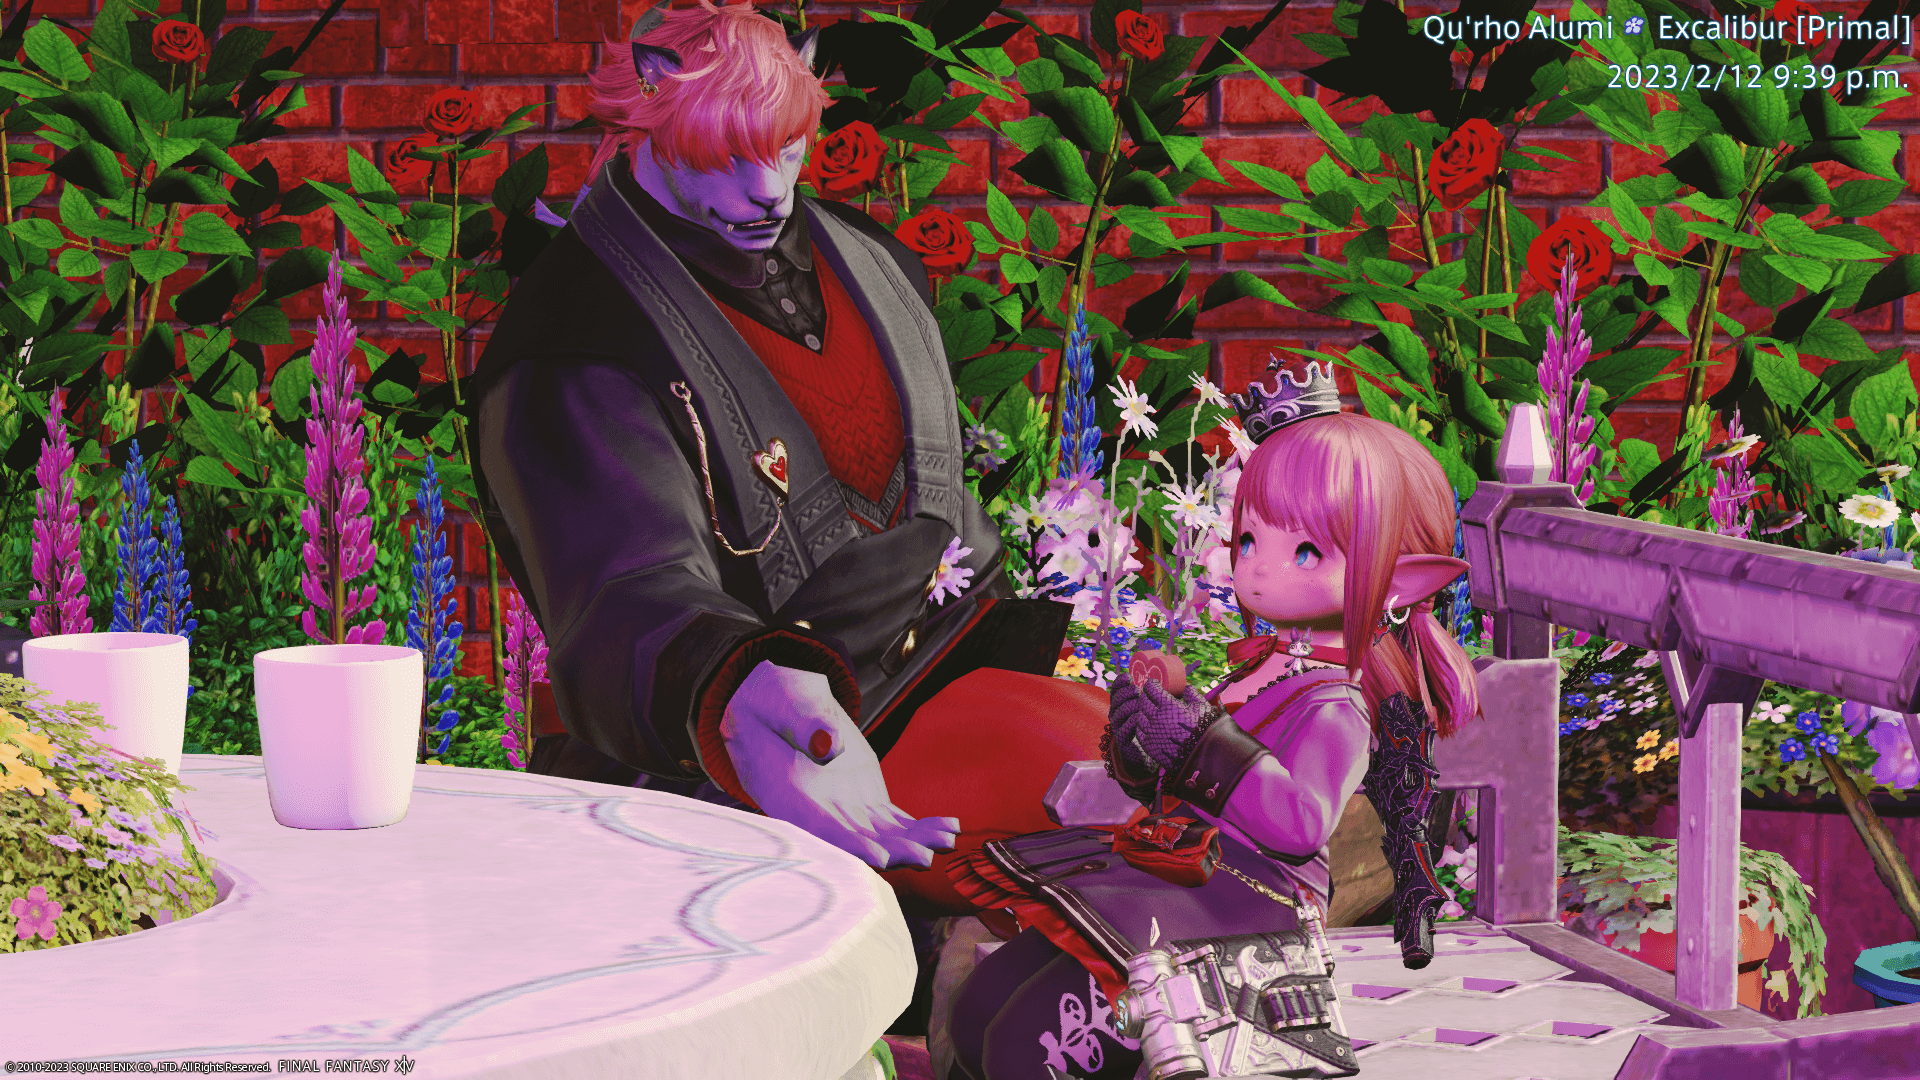 A screenshot with pink lighting. It features a hrothgar and a lalafell sitting outside, surrounded by plants. The hrothgar holds out their hand to the lalafell sitting on the bench, who is eating a large chocolate heart with a cute pout.